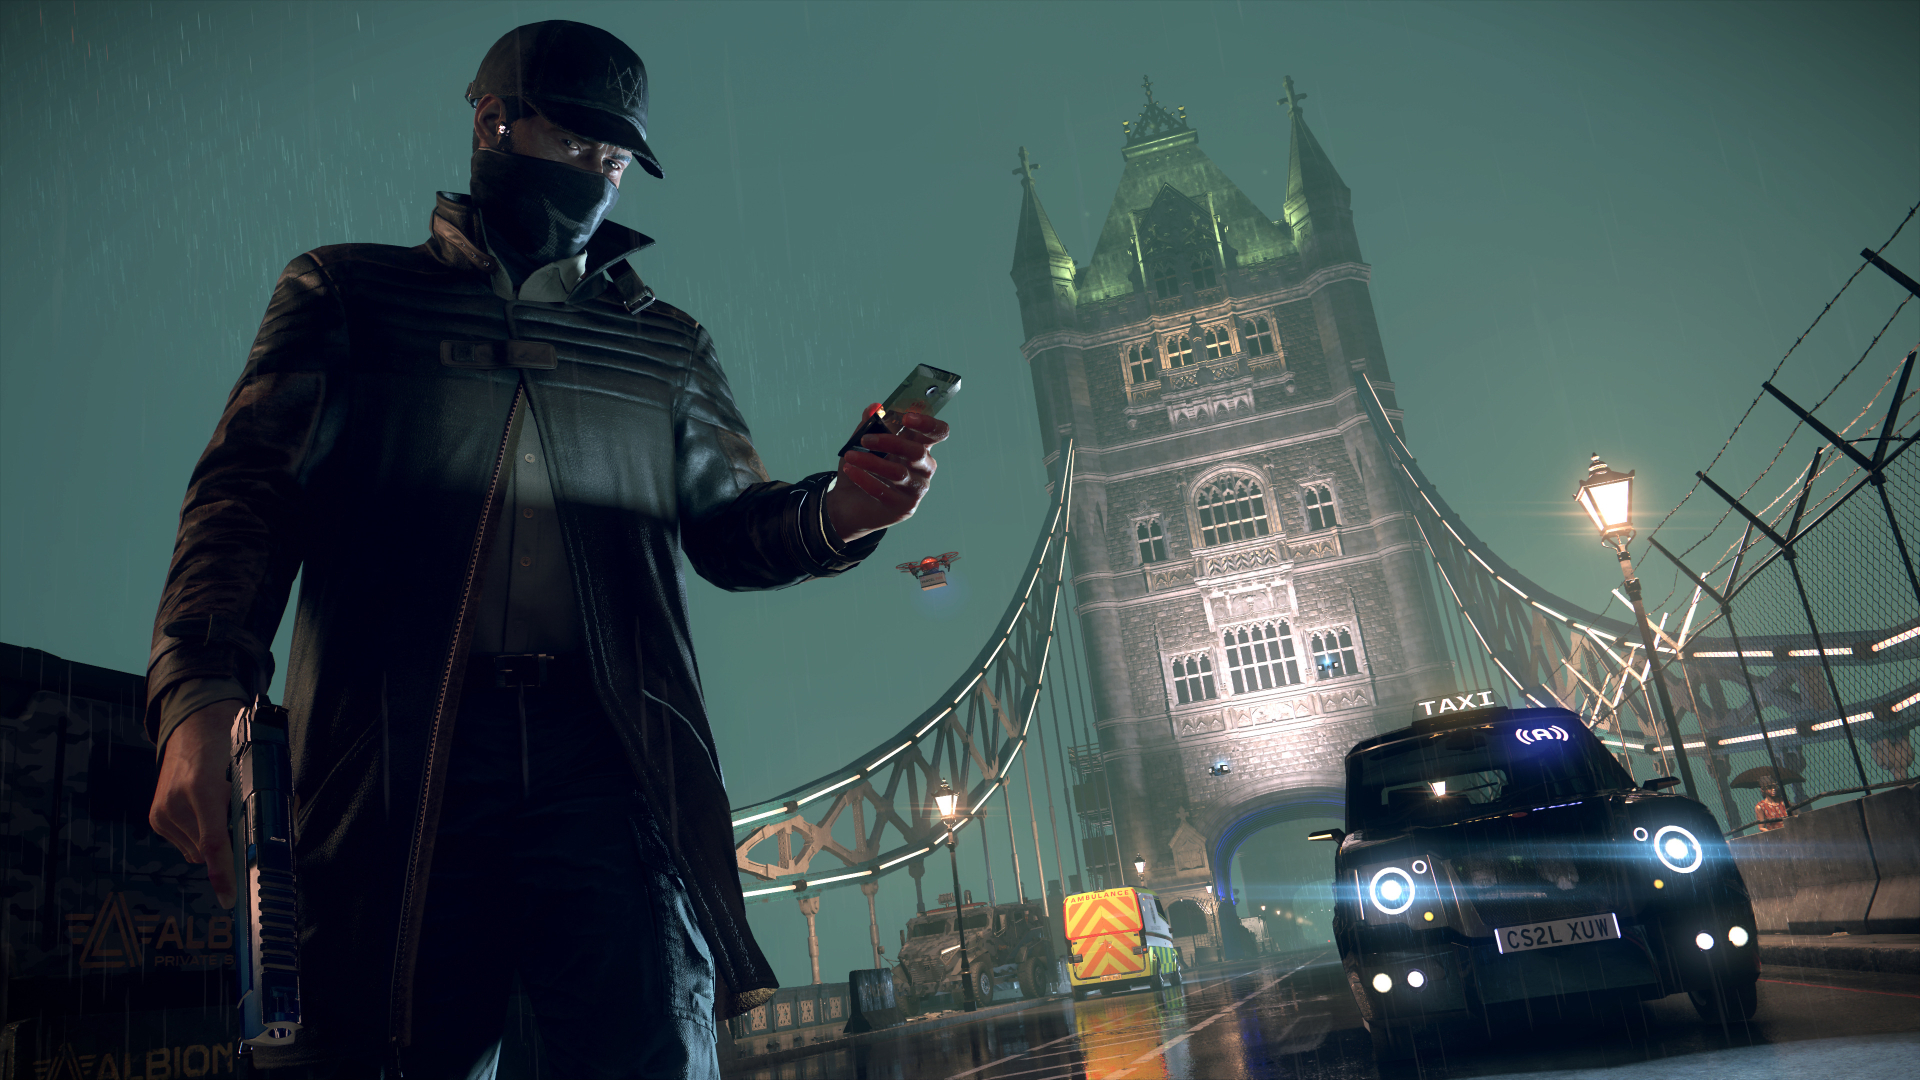 19x1080 Watch Dogs Legion Recruits 1080p Laptop Full Hd Wallpaper Hd Games 4k Wallpapers Images Photos And Background Wallpapers Den